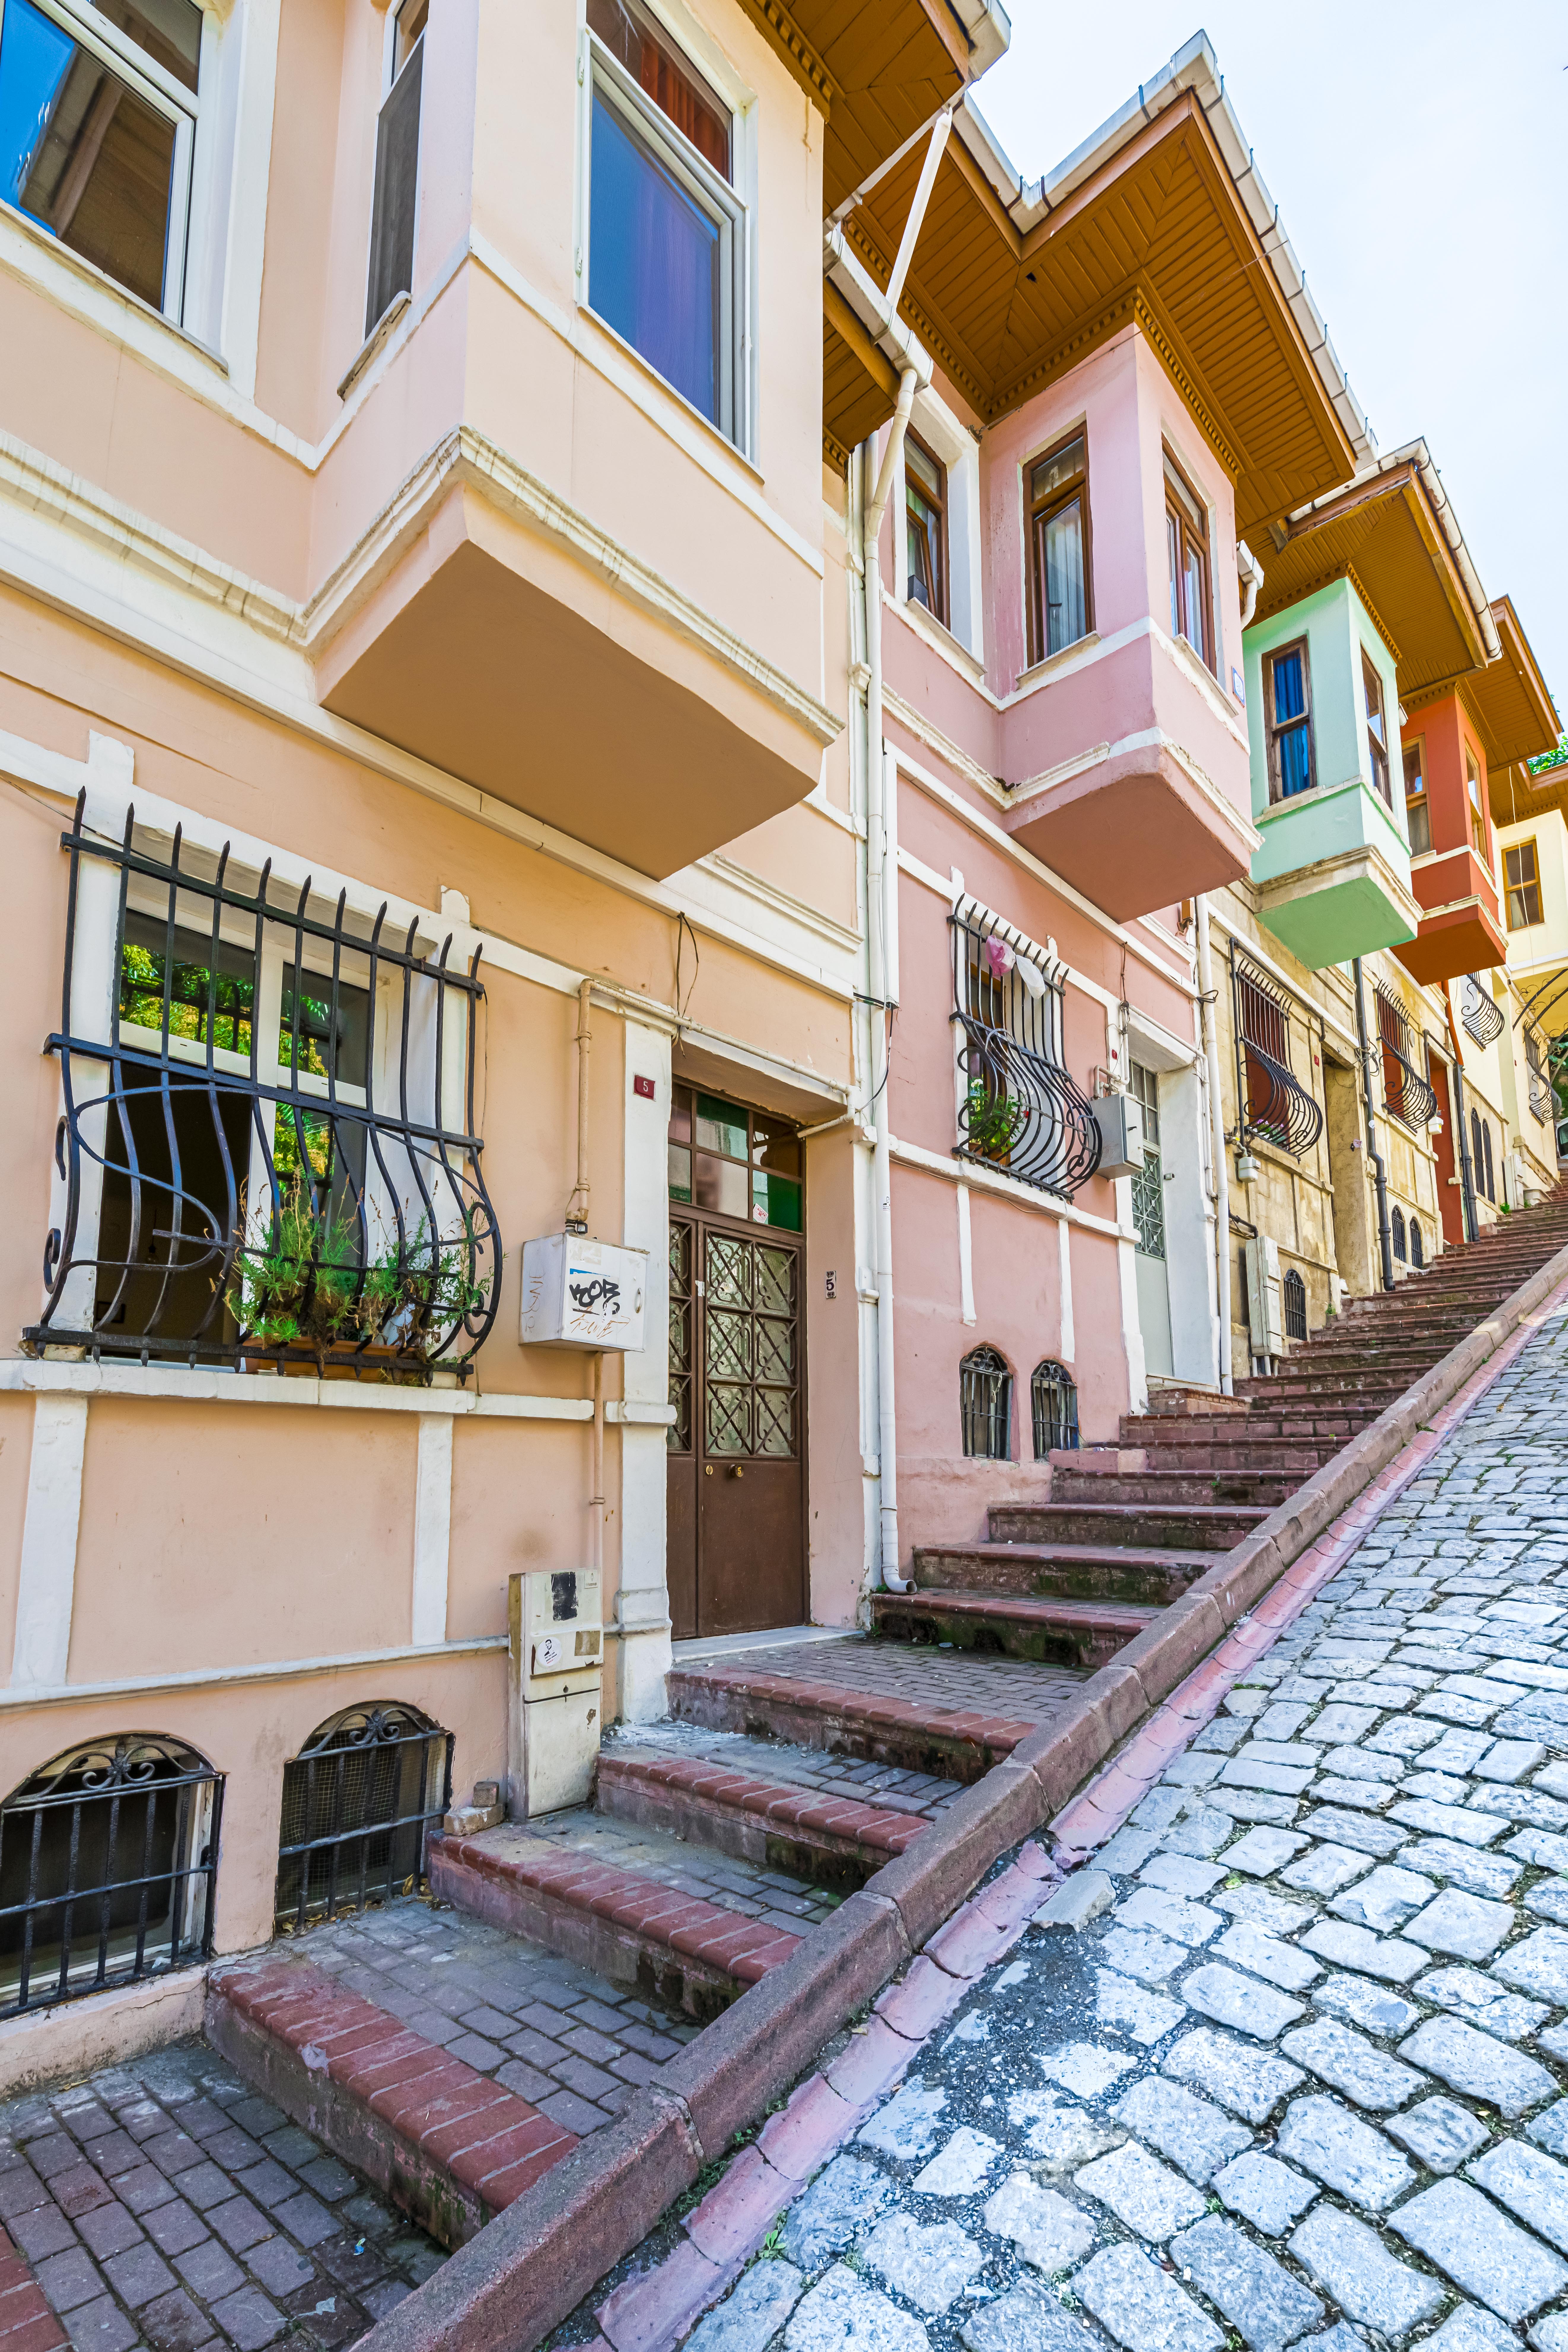 10 Top Photography Spots in Istanbul